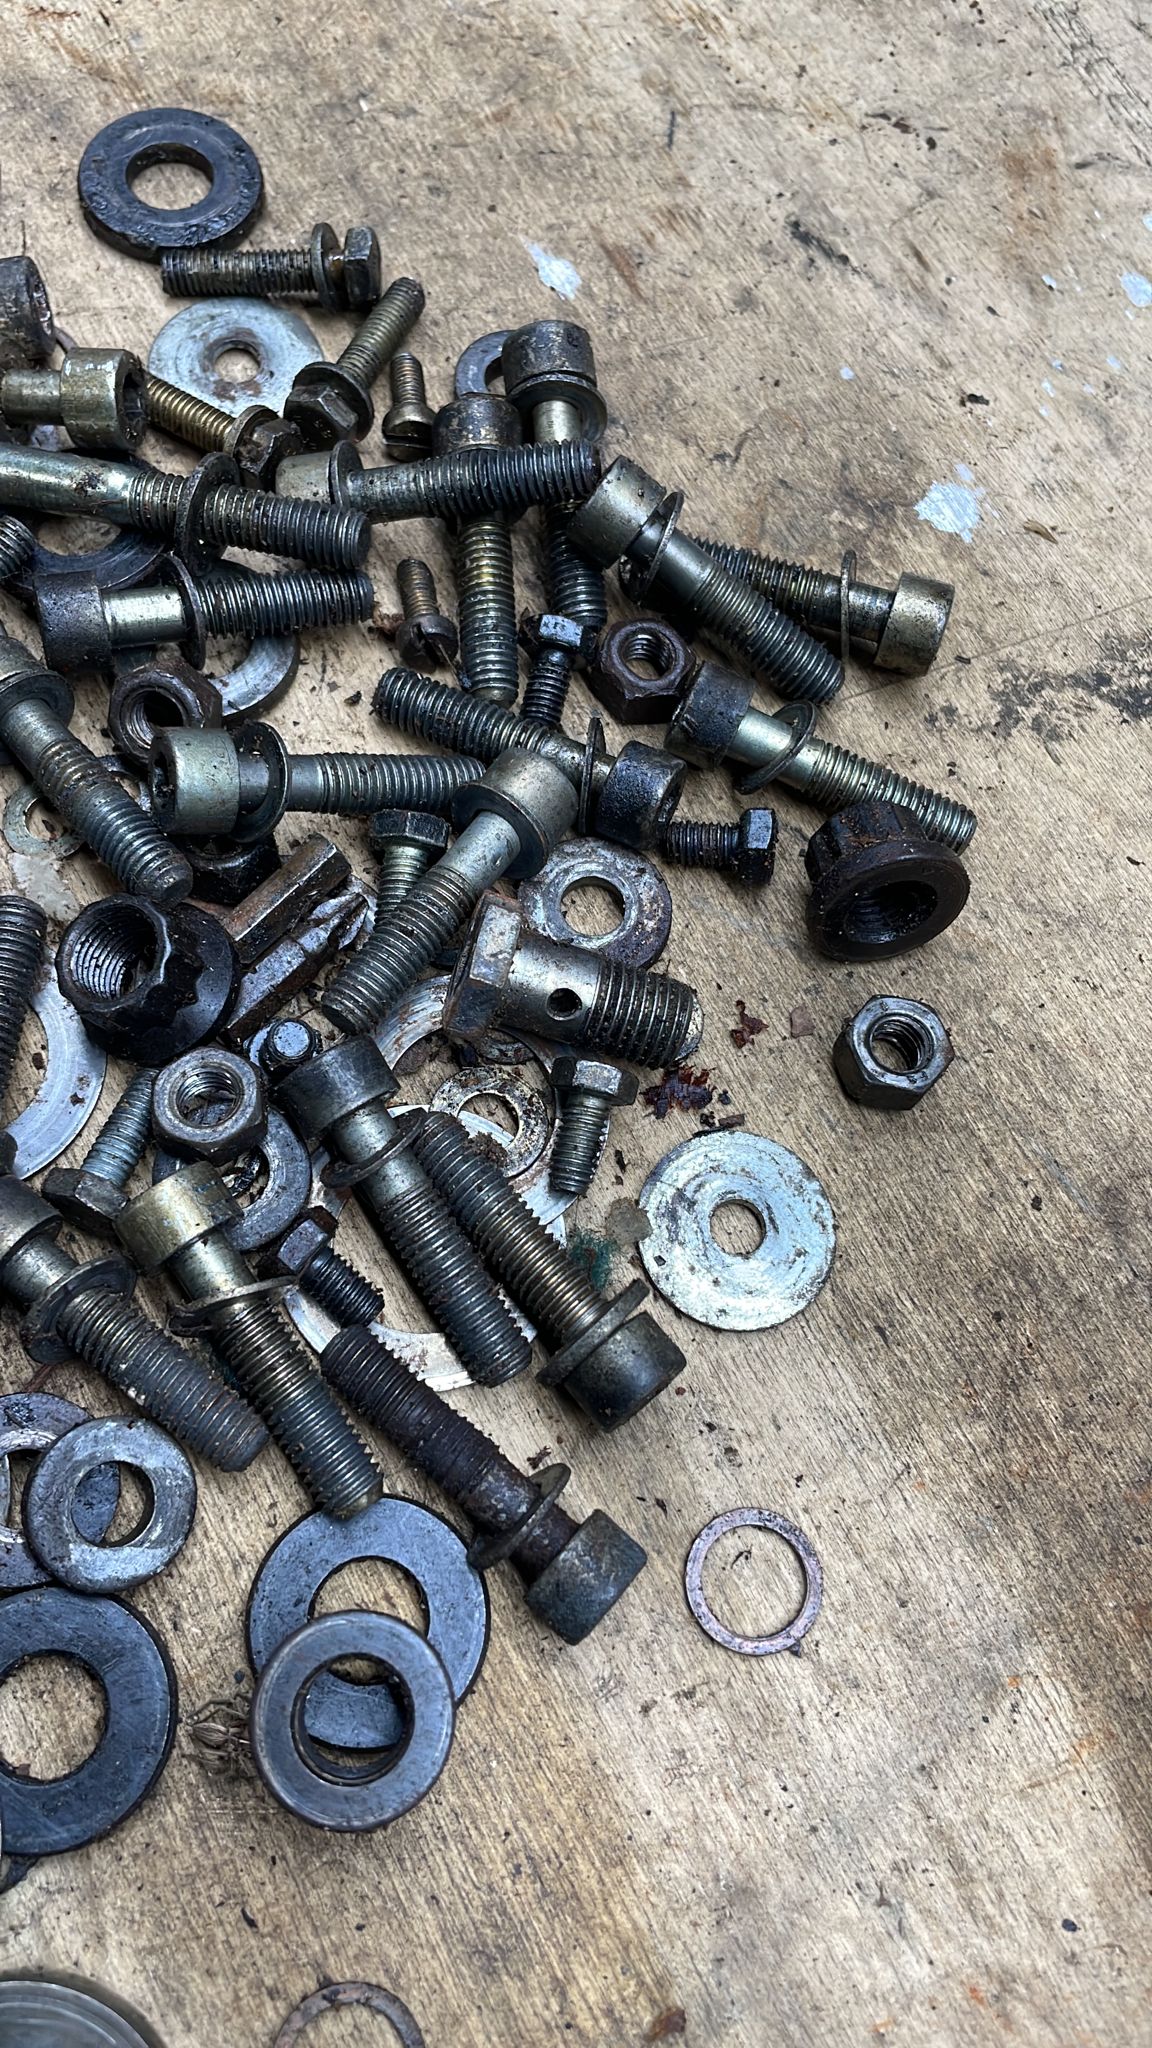 Porsche 944 Turbo Job lot of cylinder head bolts nuts and washers, used